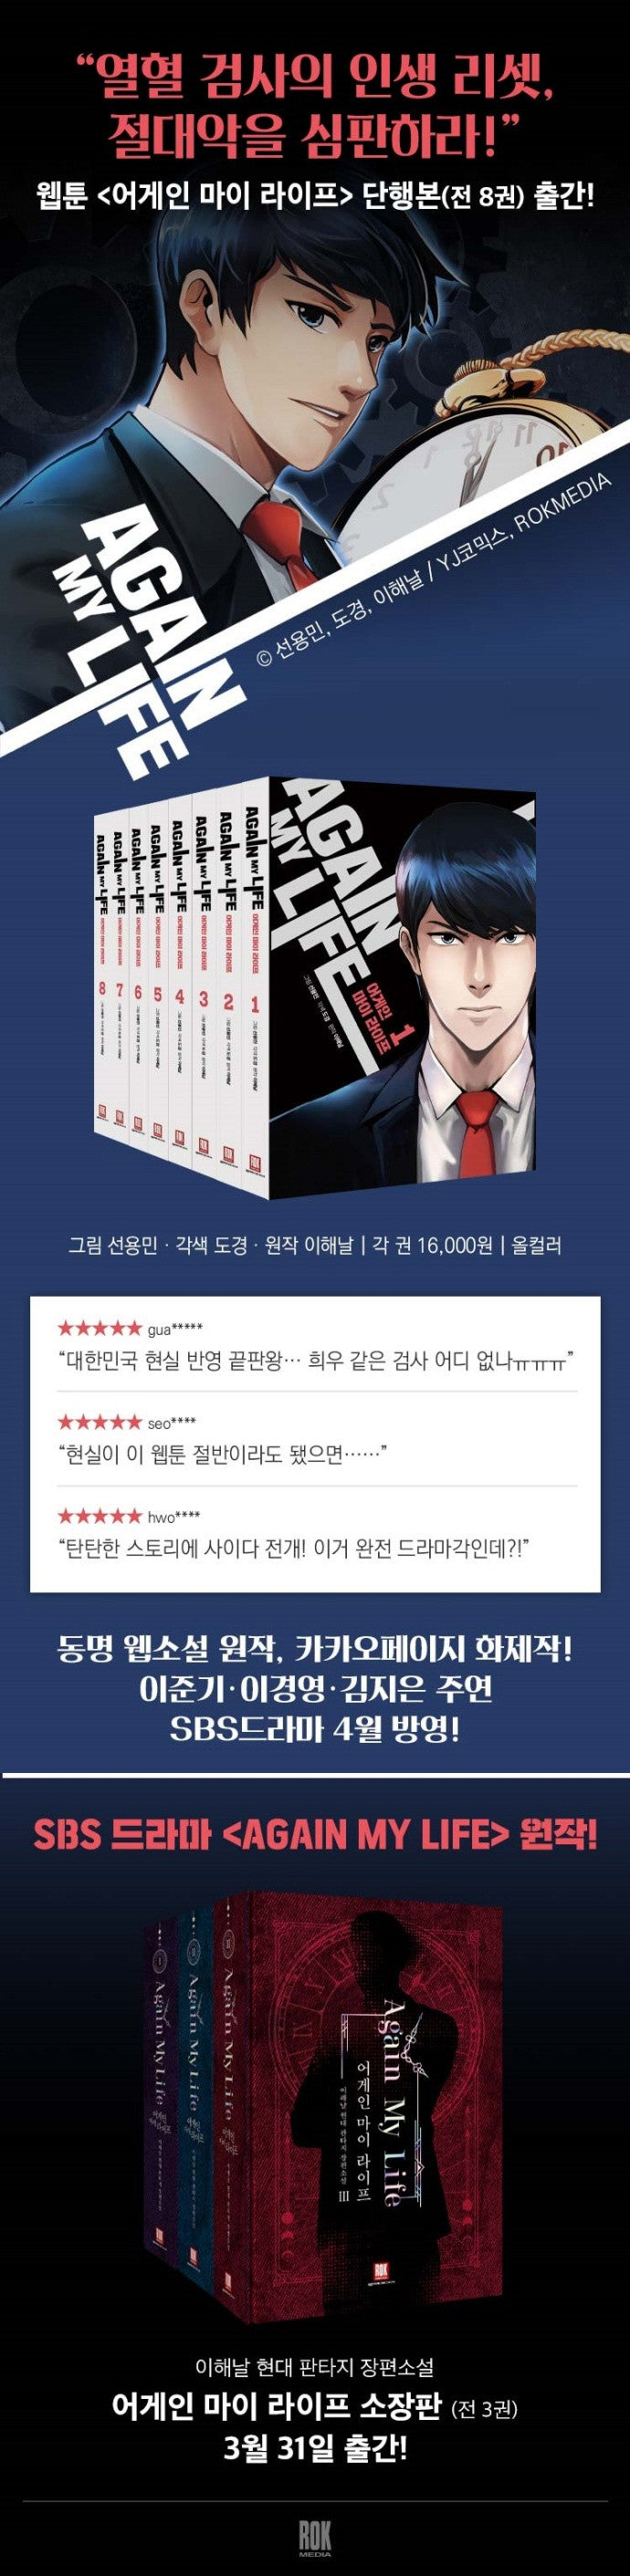 Again My Life SBS Drama Comic Book Manhwa   Young prosecutor who gets a second chance at justice after failing to bring down a powerful person. Lee Joon Gi stars as Kim Hee Woo, who was unjustly killed while investigating a corrupt politician but unexpectedly gets a second chance at life.  Product Size(mm) 150 x 210  Component Again My Life SBS Drama Comic Book Manhwa x 1ea  Page 288  Country Of Origin Republic Of Korea